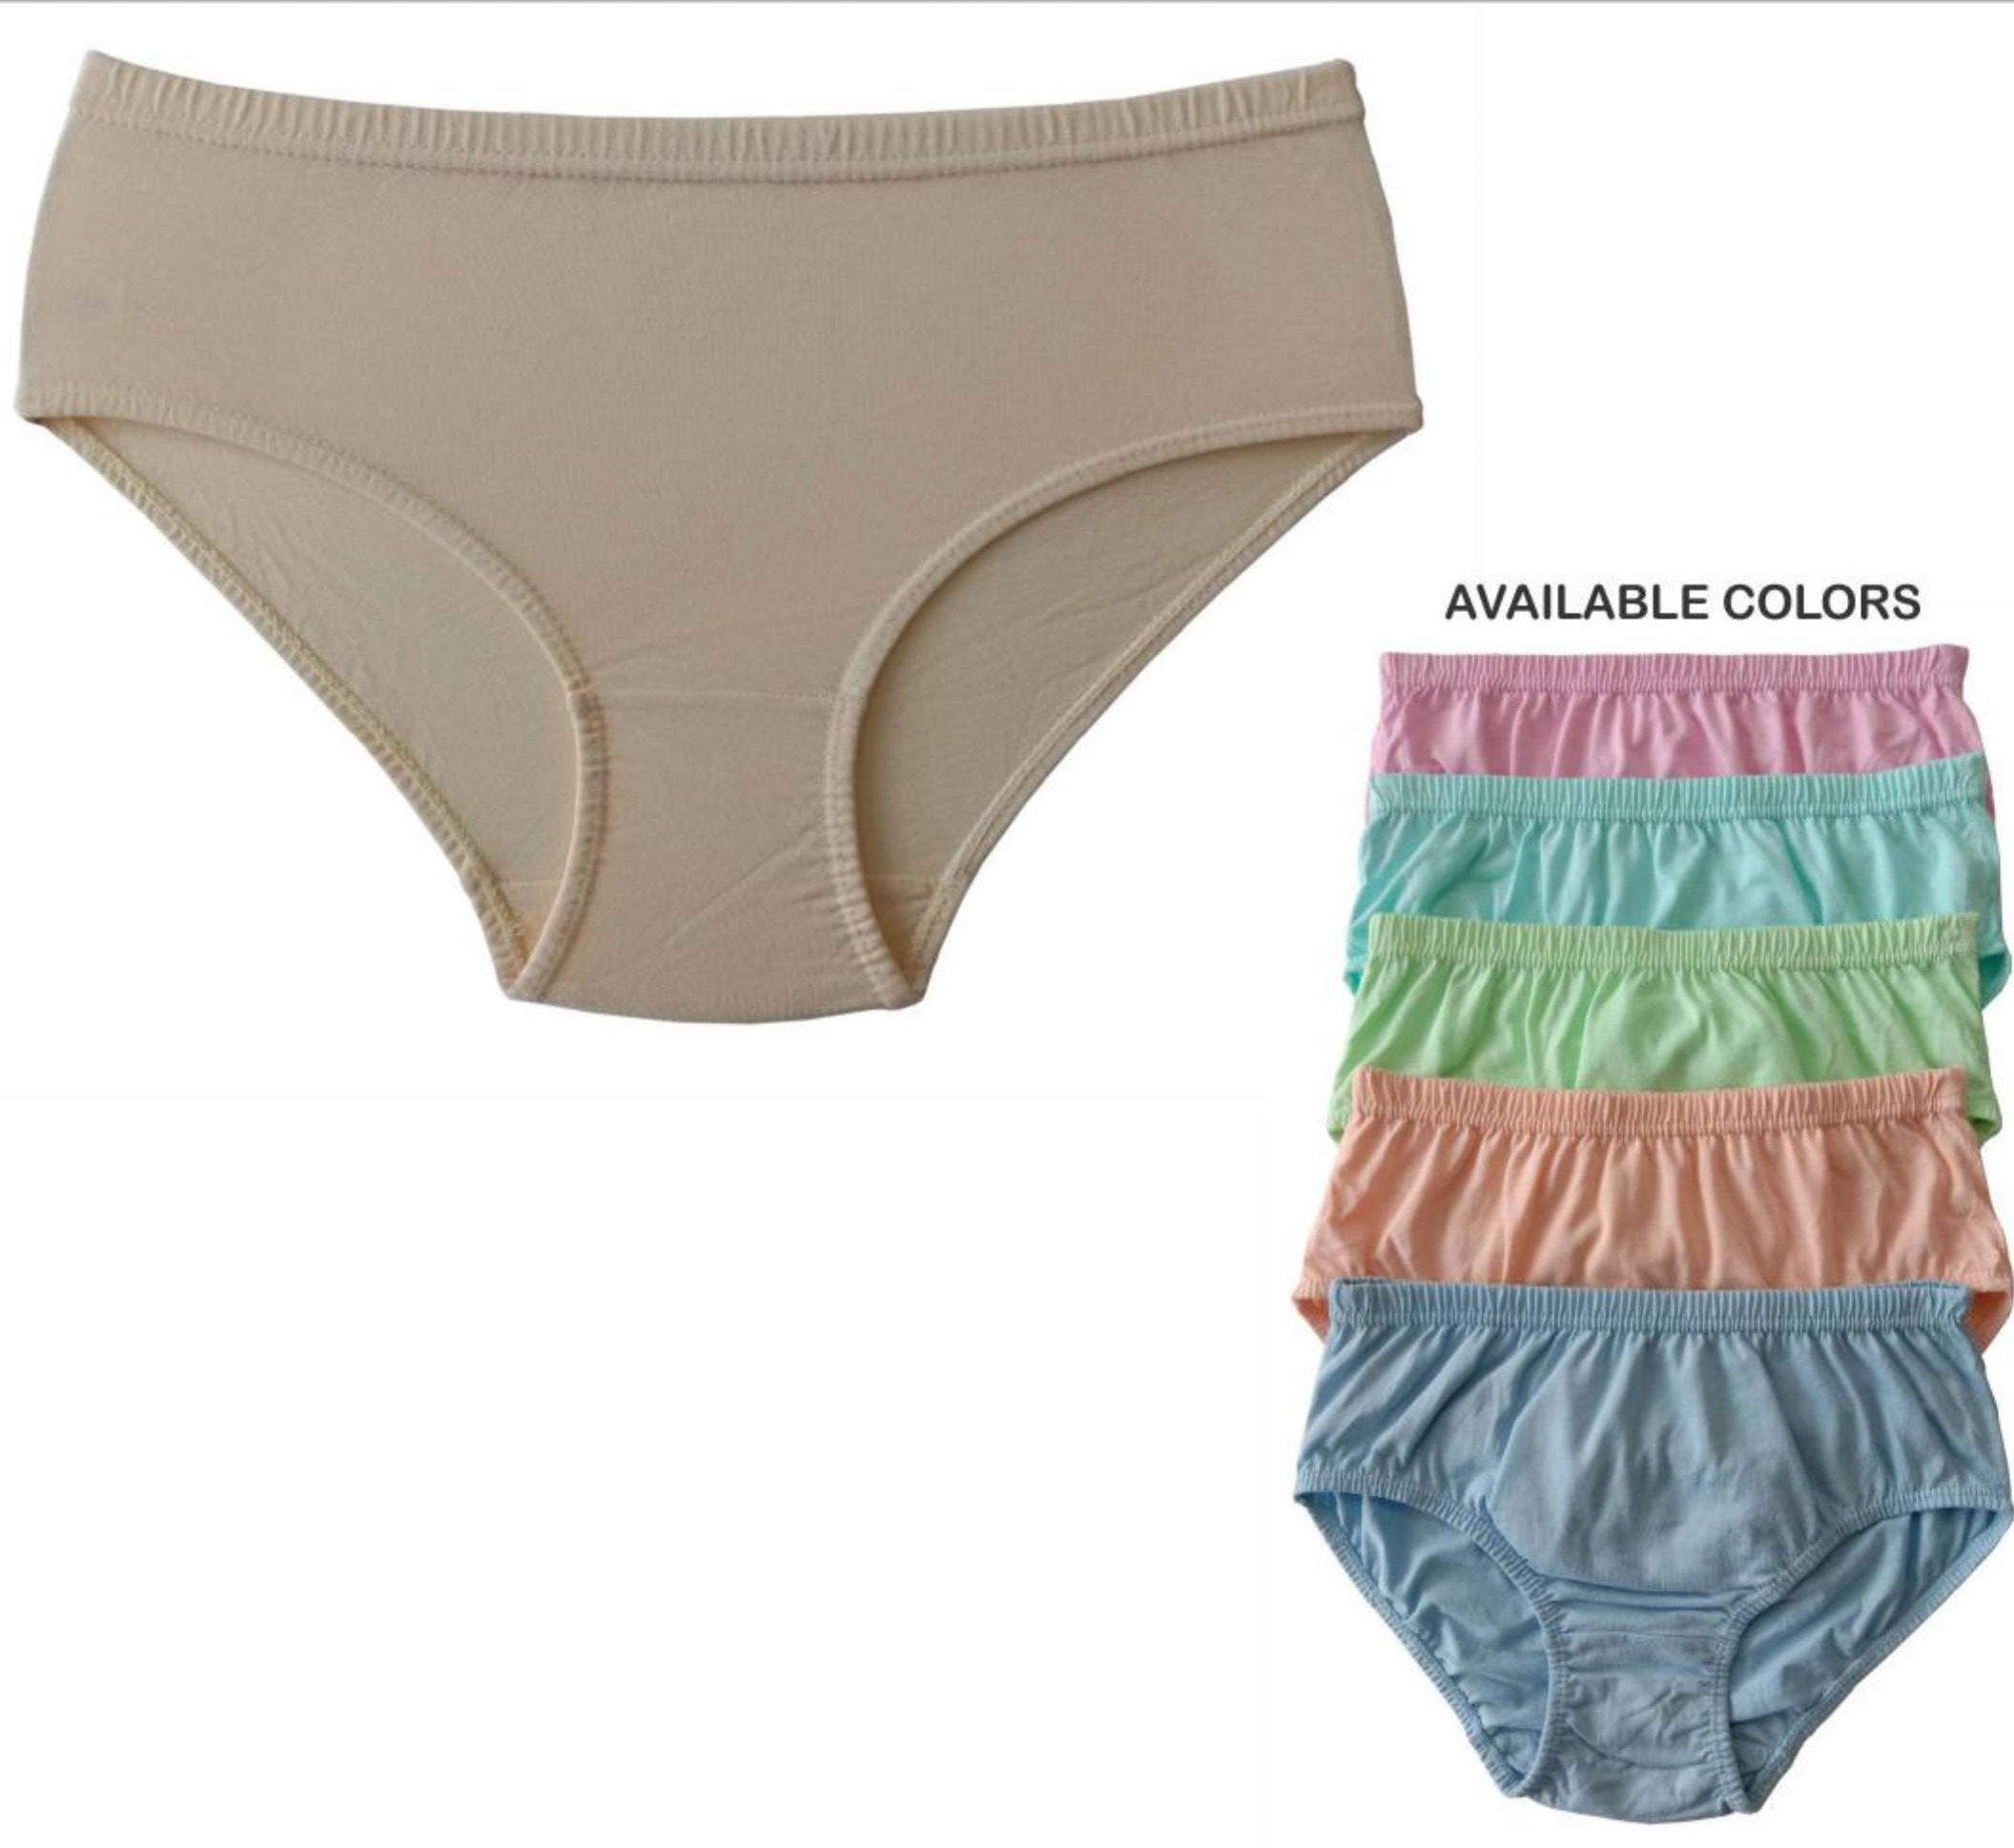 Plain Light Color Cotton Brief Hipster Panties for Women (Pack of